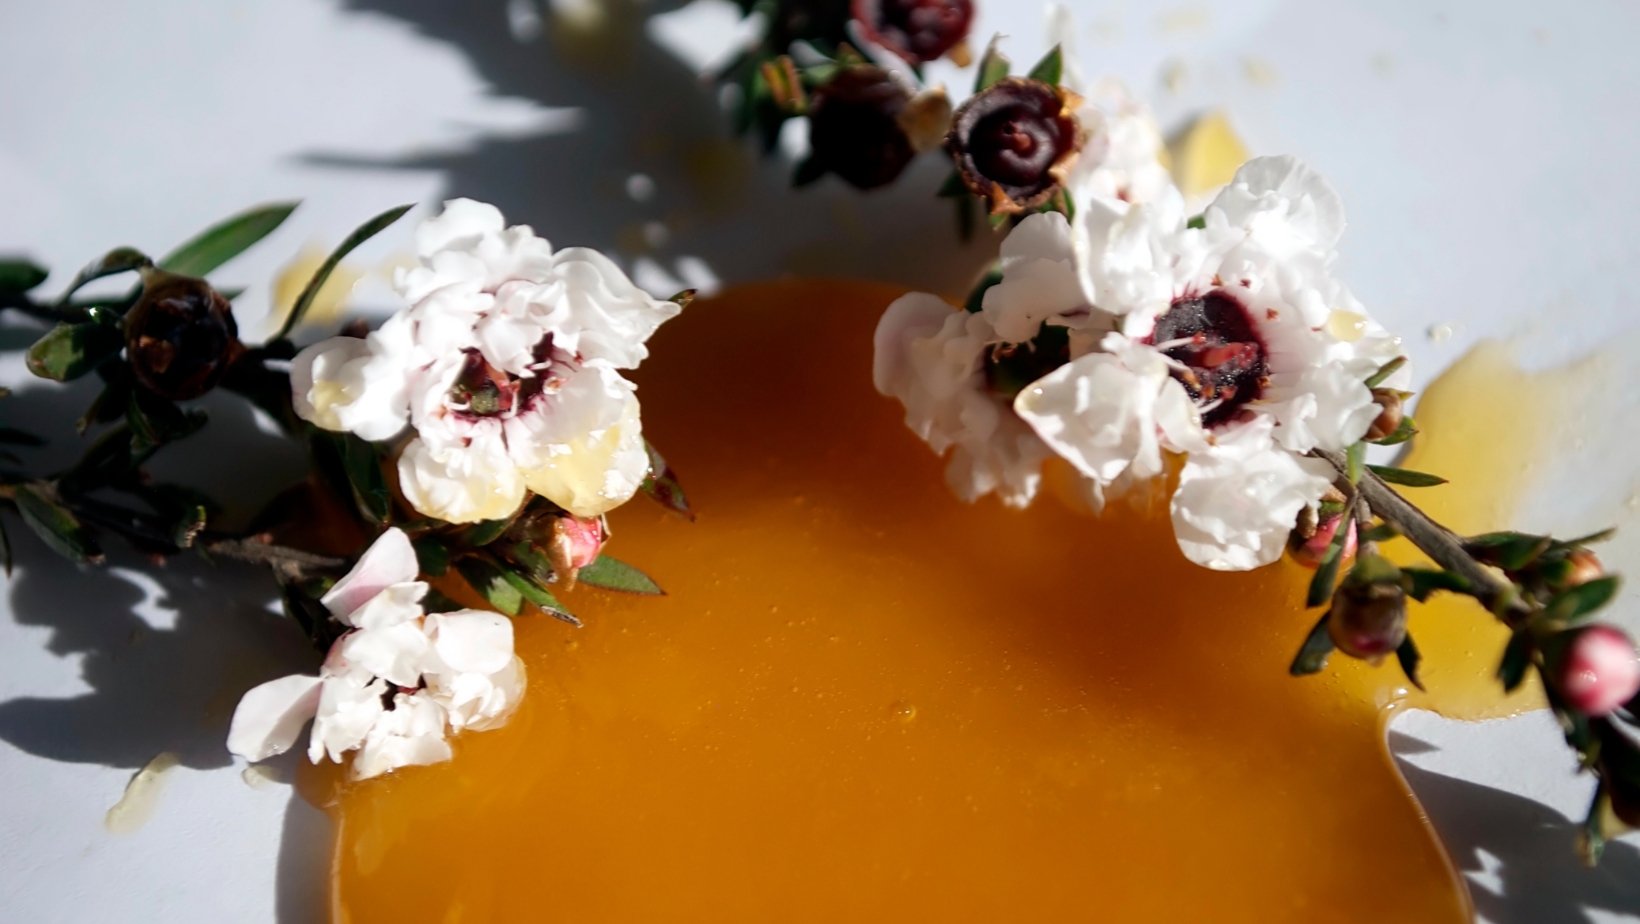 How Does Monofloral Manuka Honey Compare To Multifloral Honey? - PURITI